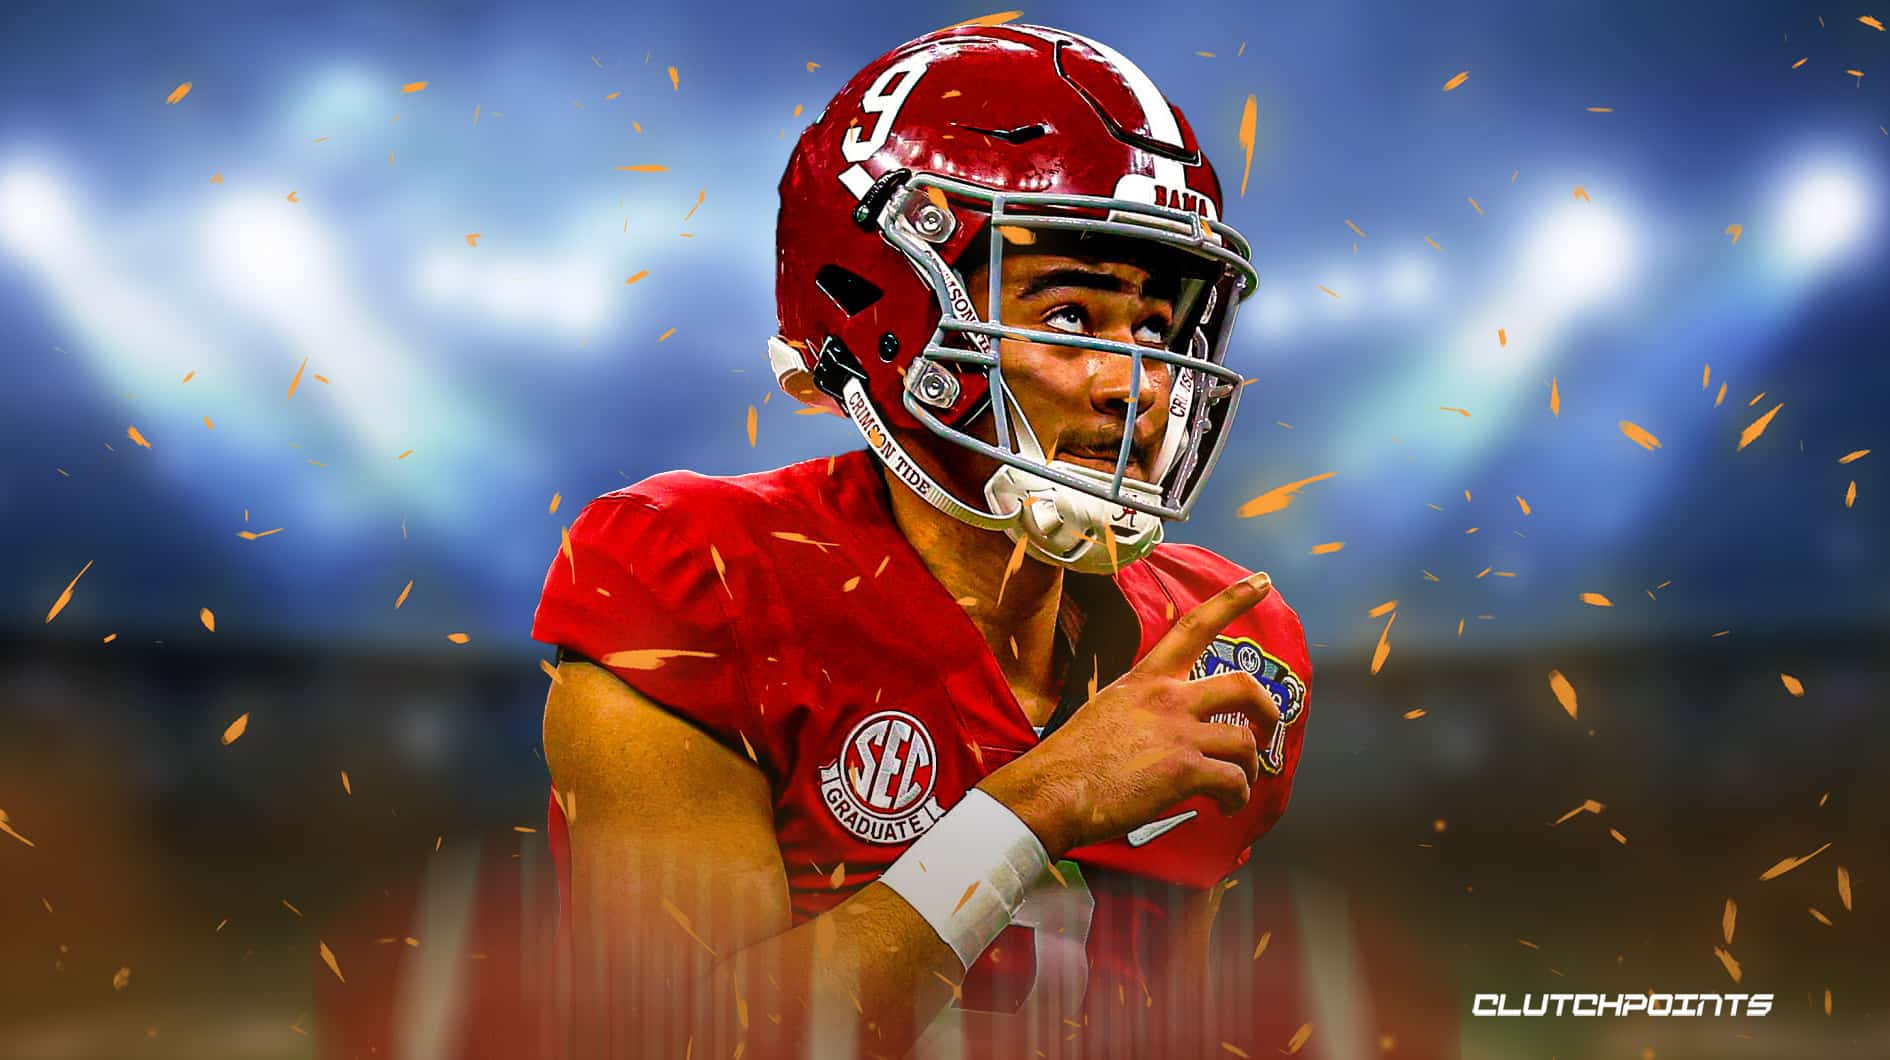 NFC coach defends former Alabama QB Bryce Young's decision to not throw